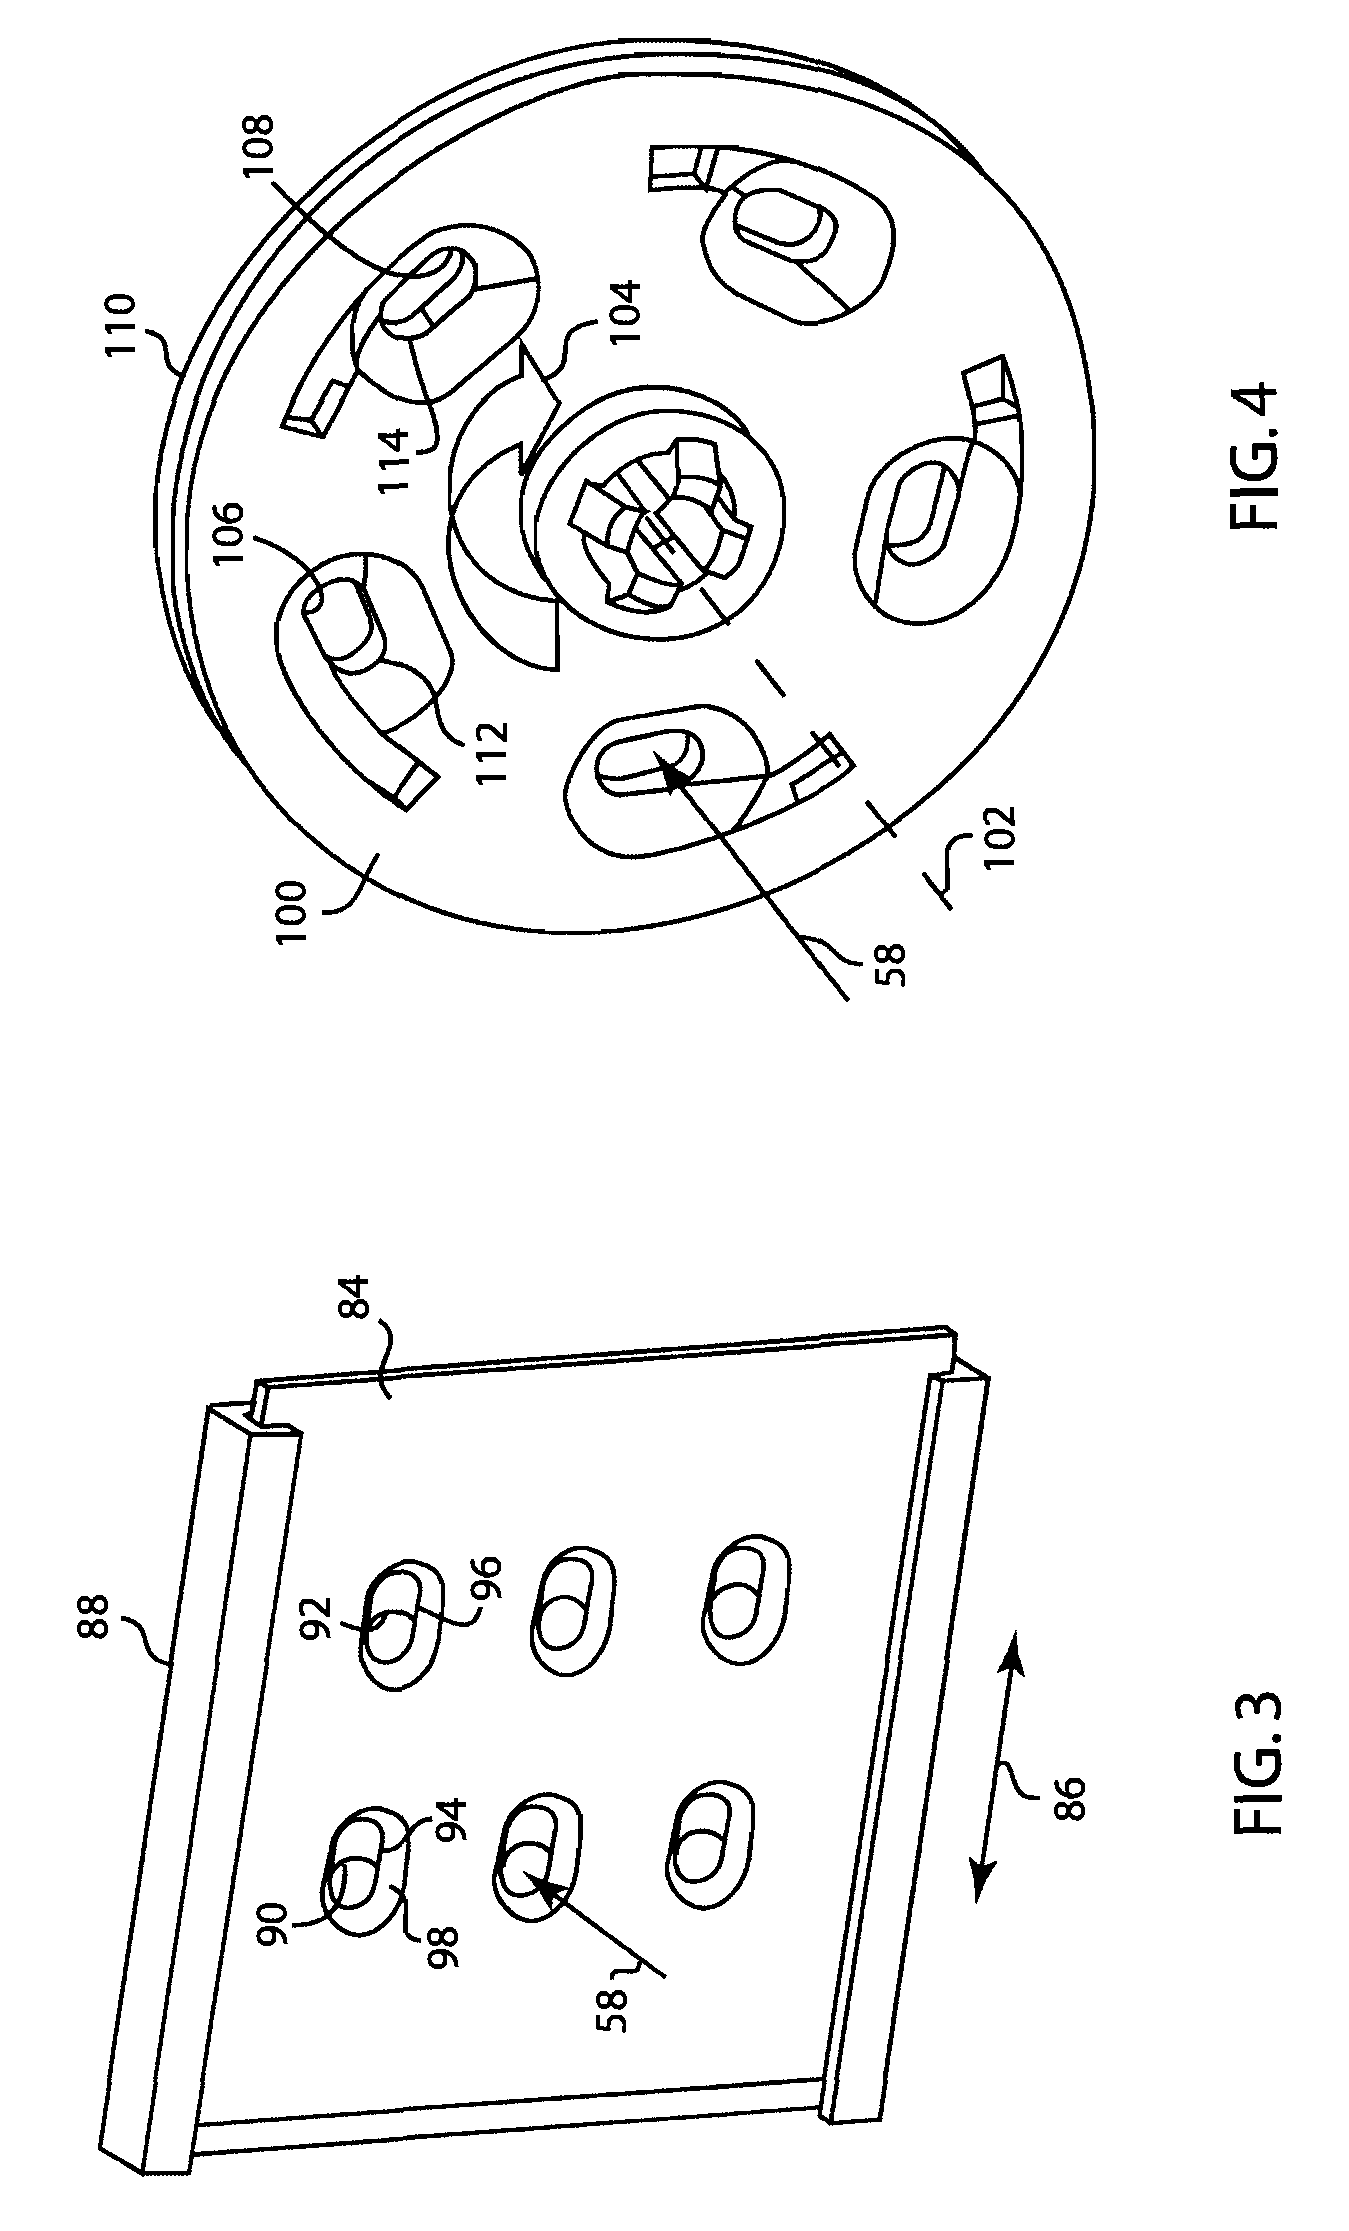 Inertial Gas-Liquid Separator with Valve and Variable Flow Actuator